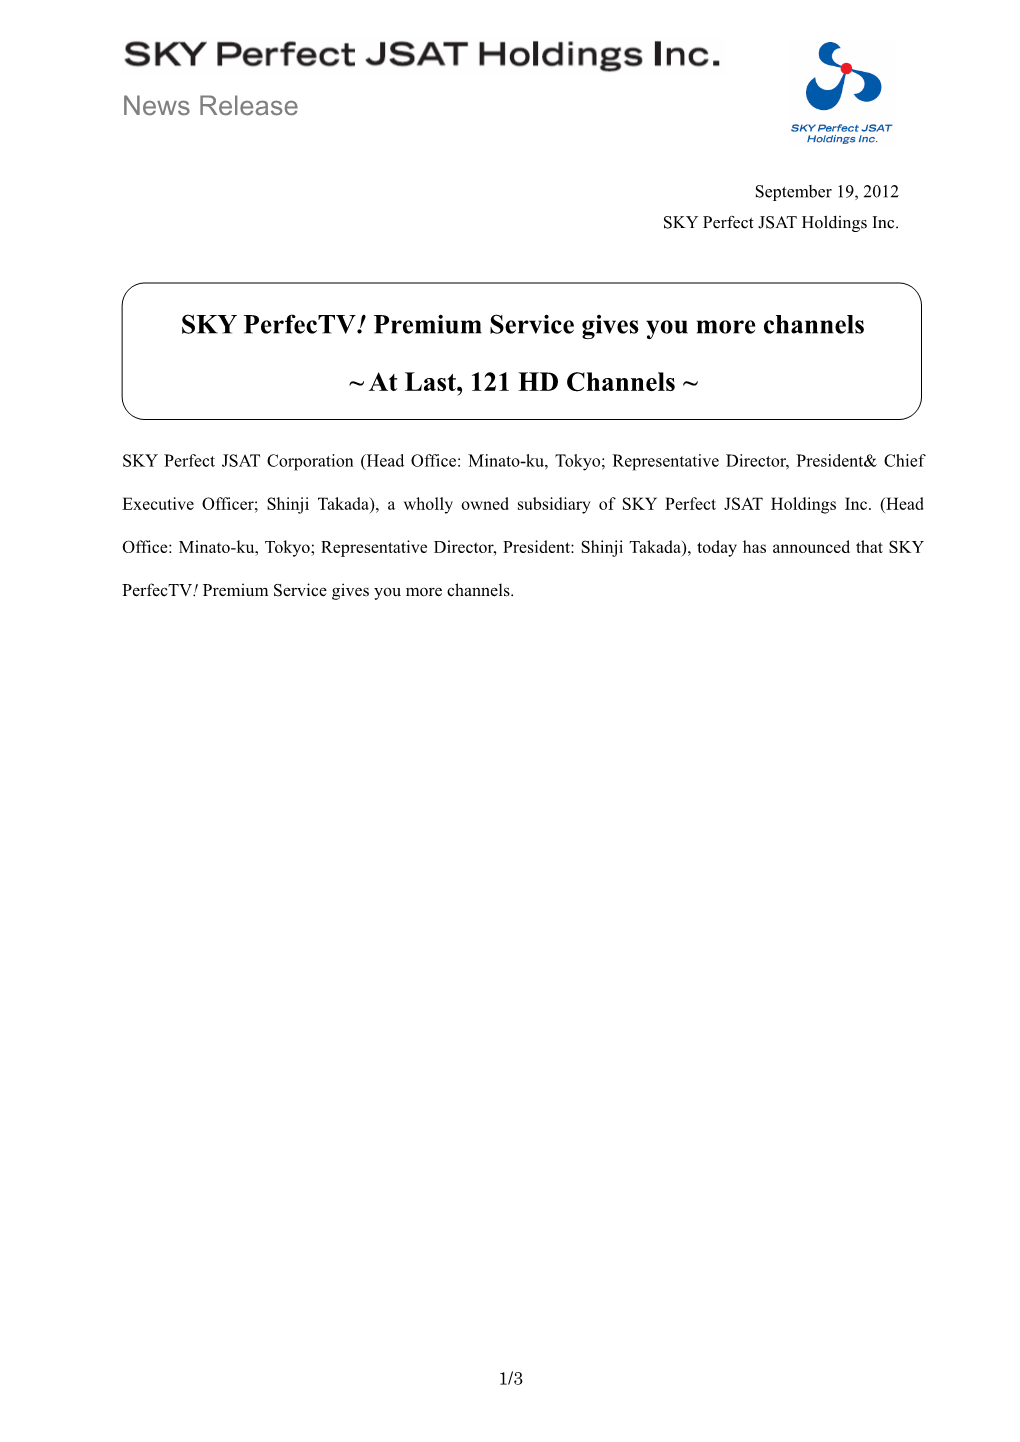 SKY Perfectv! Premium Service Gives You More Channels